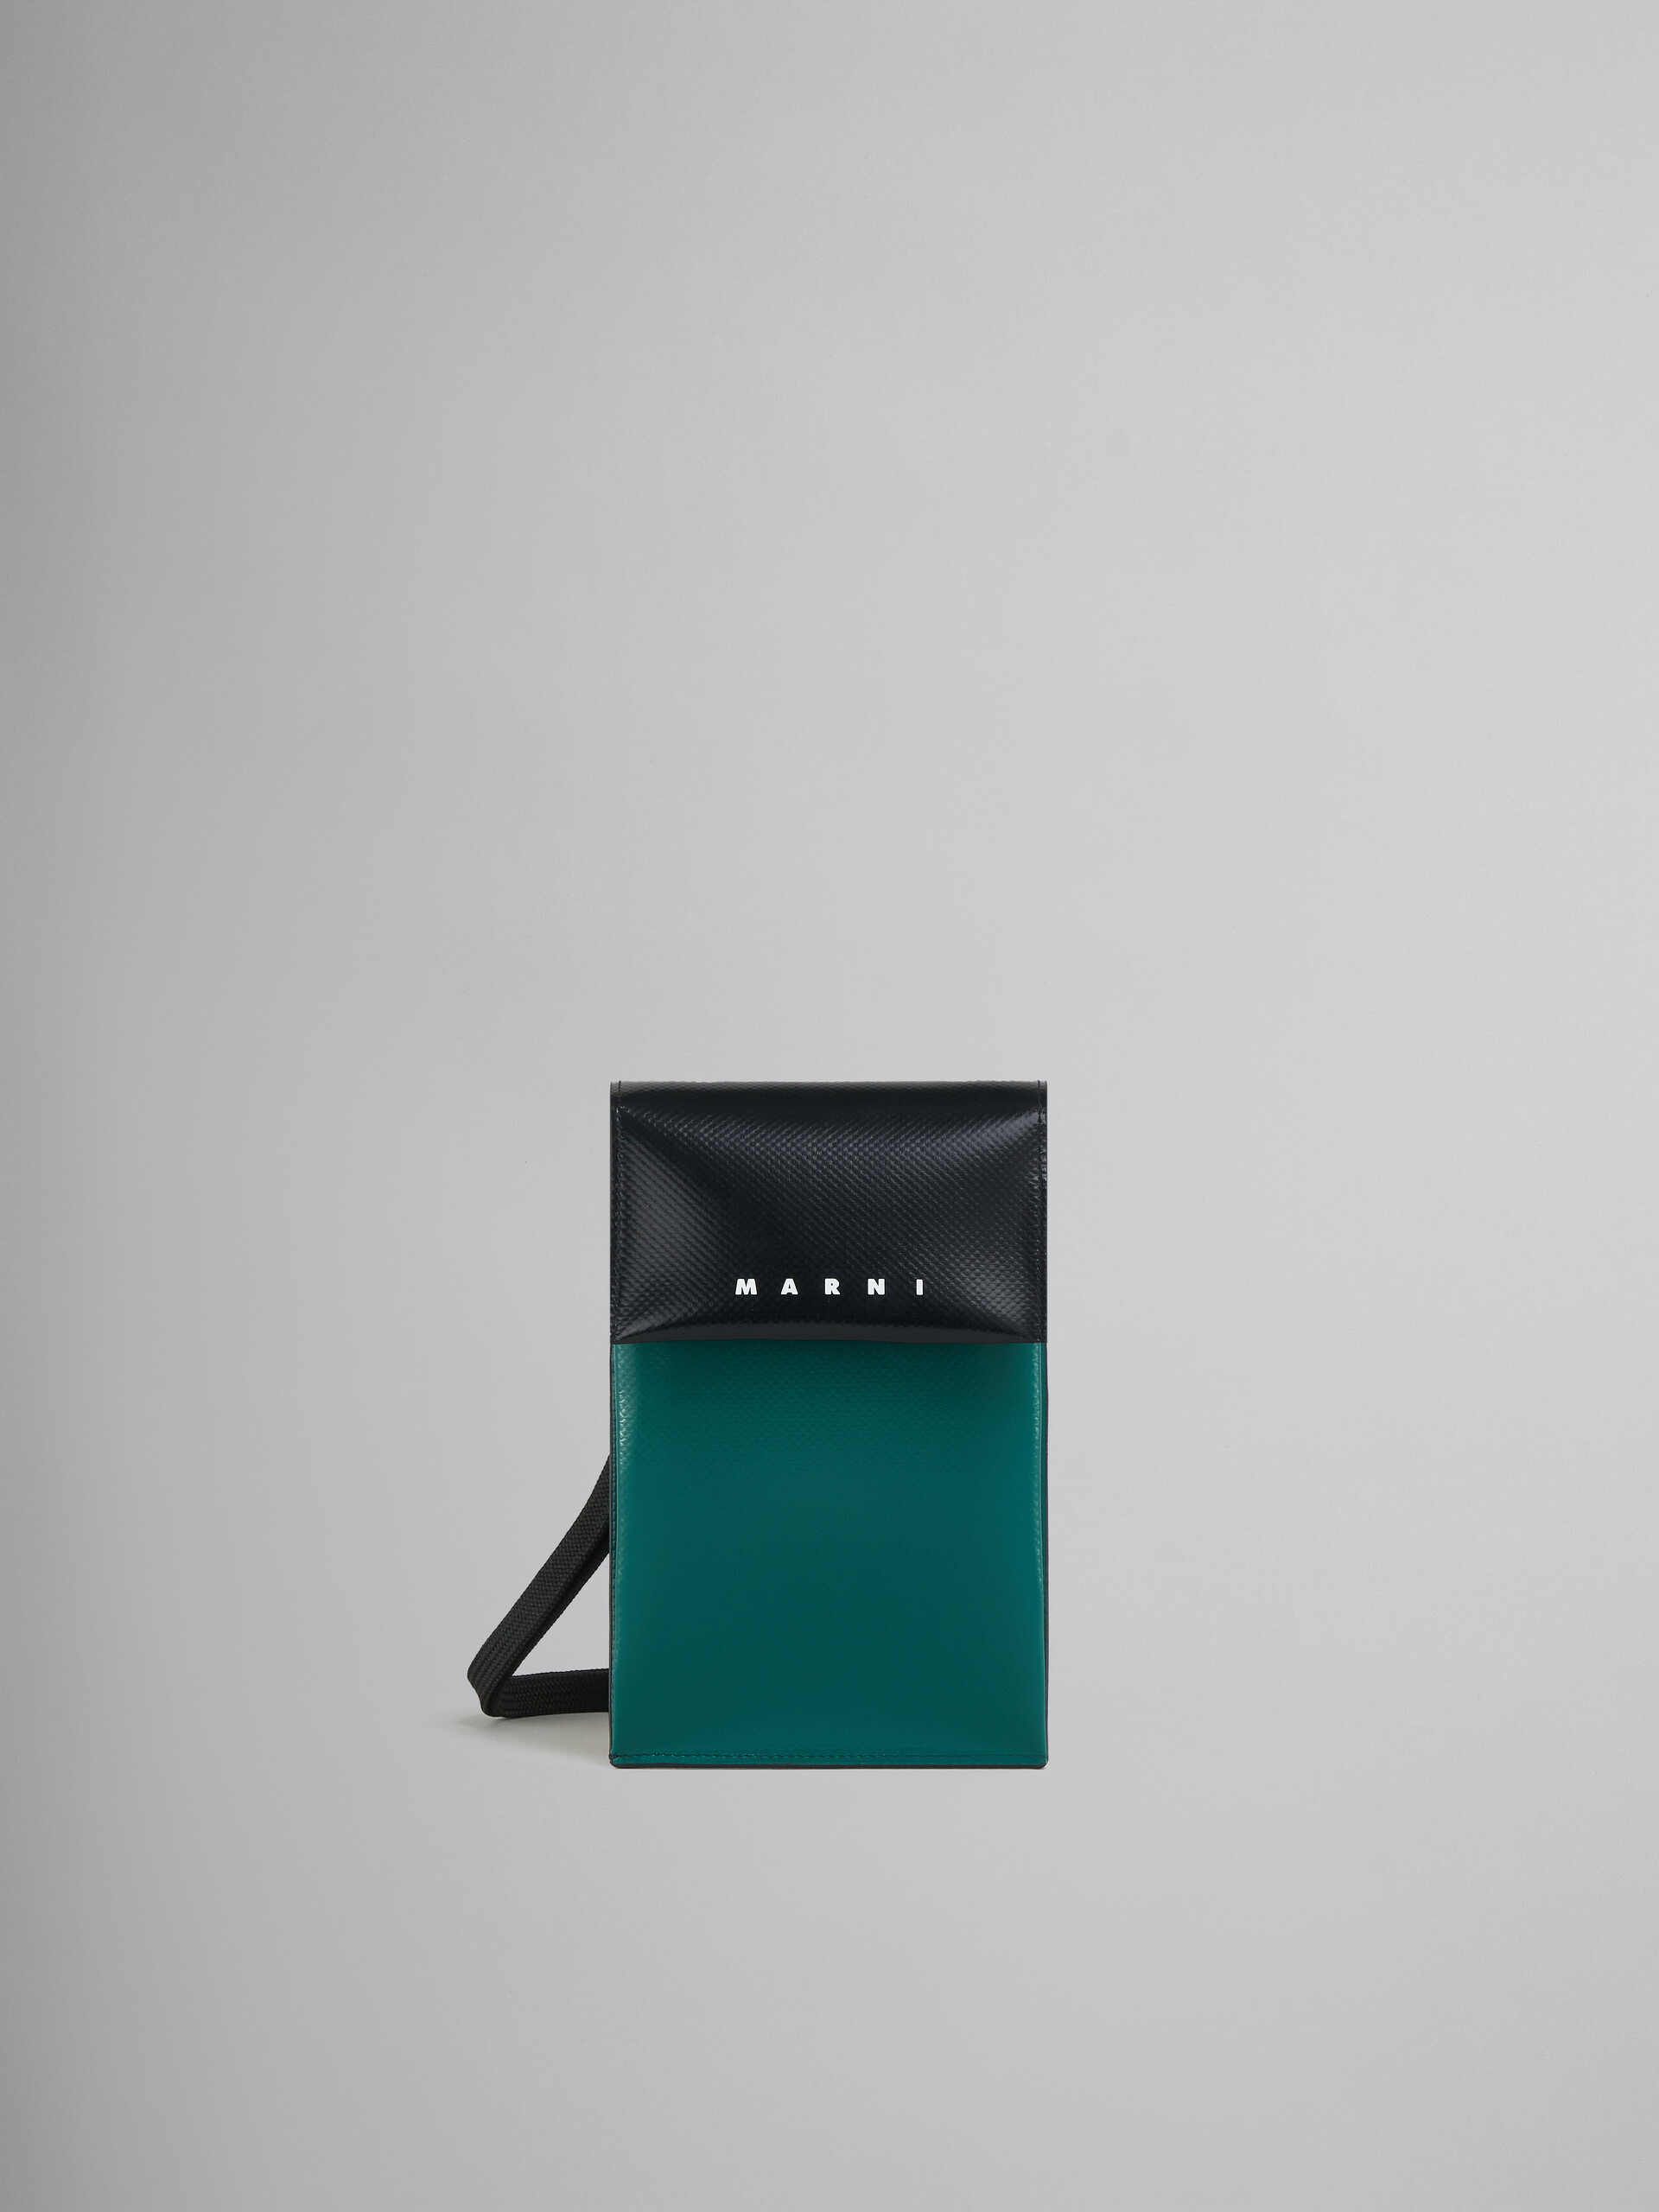 Tribeca green and black phone case - Wallets and Small Leather Goods - Image 1